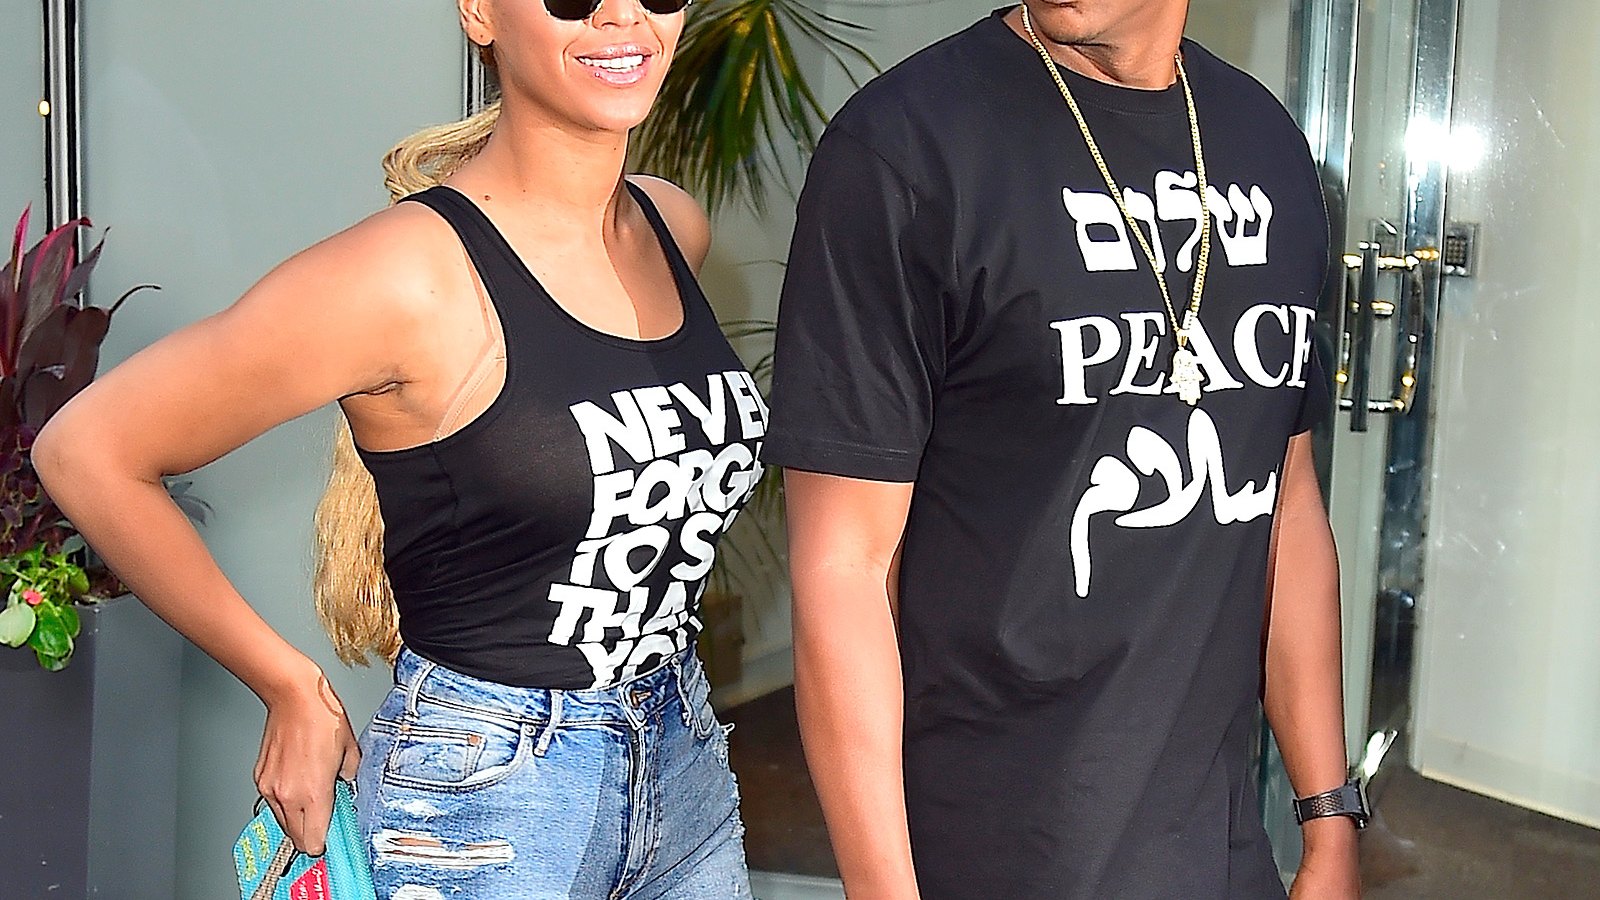 Beyonce and Jay Z are seen in Midtown on May 11, 2015 in New York City